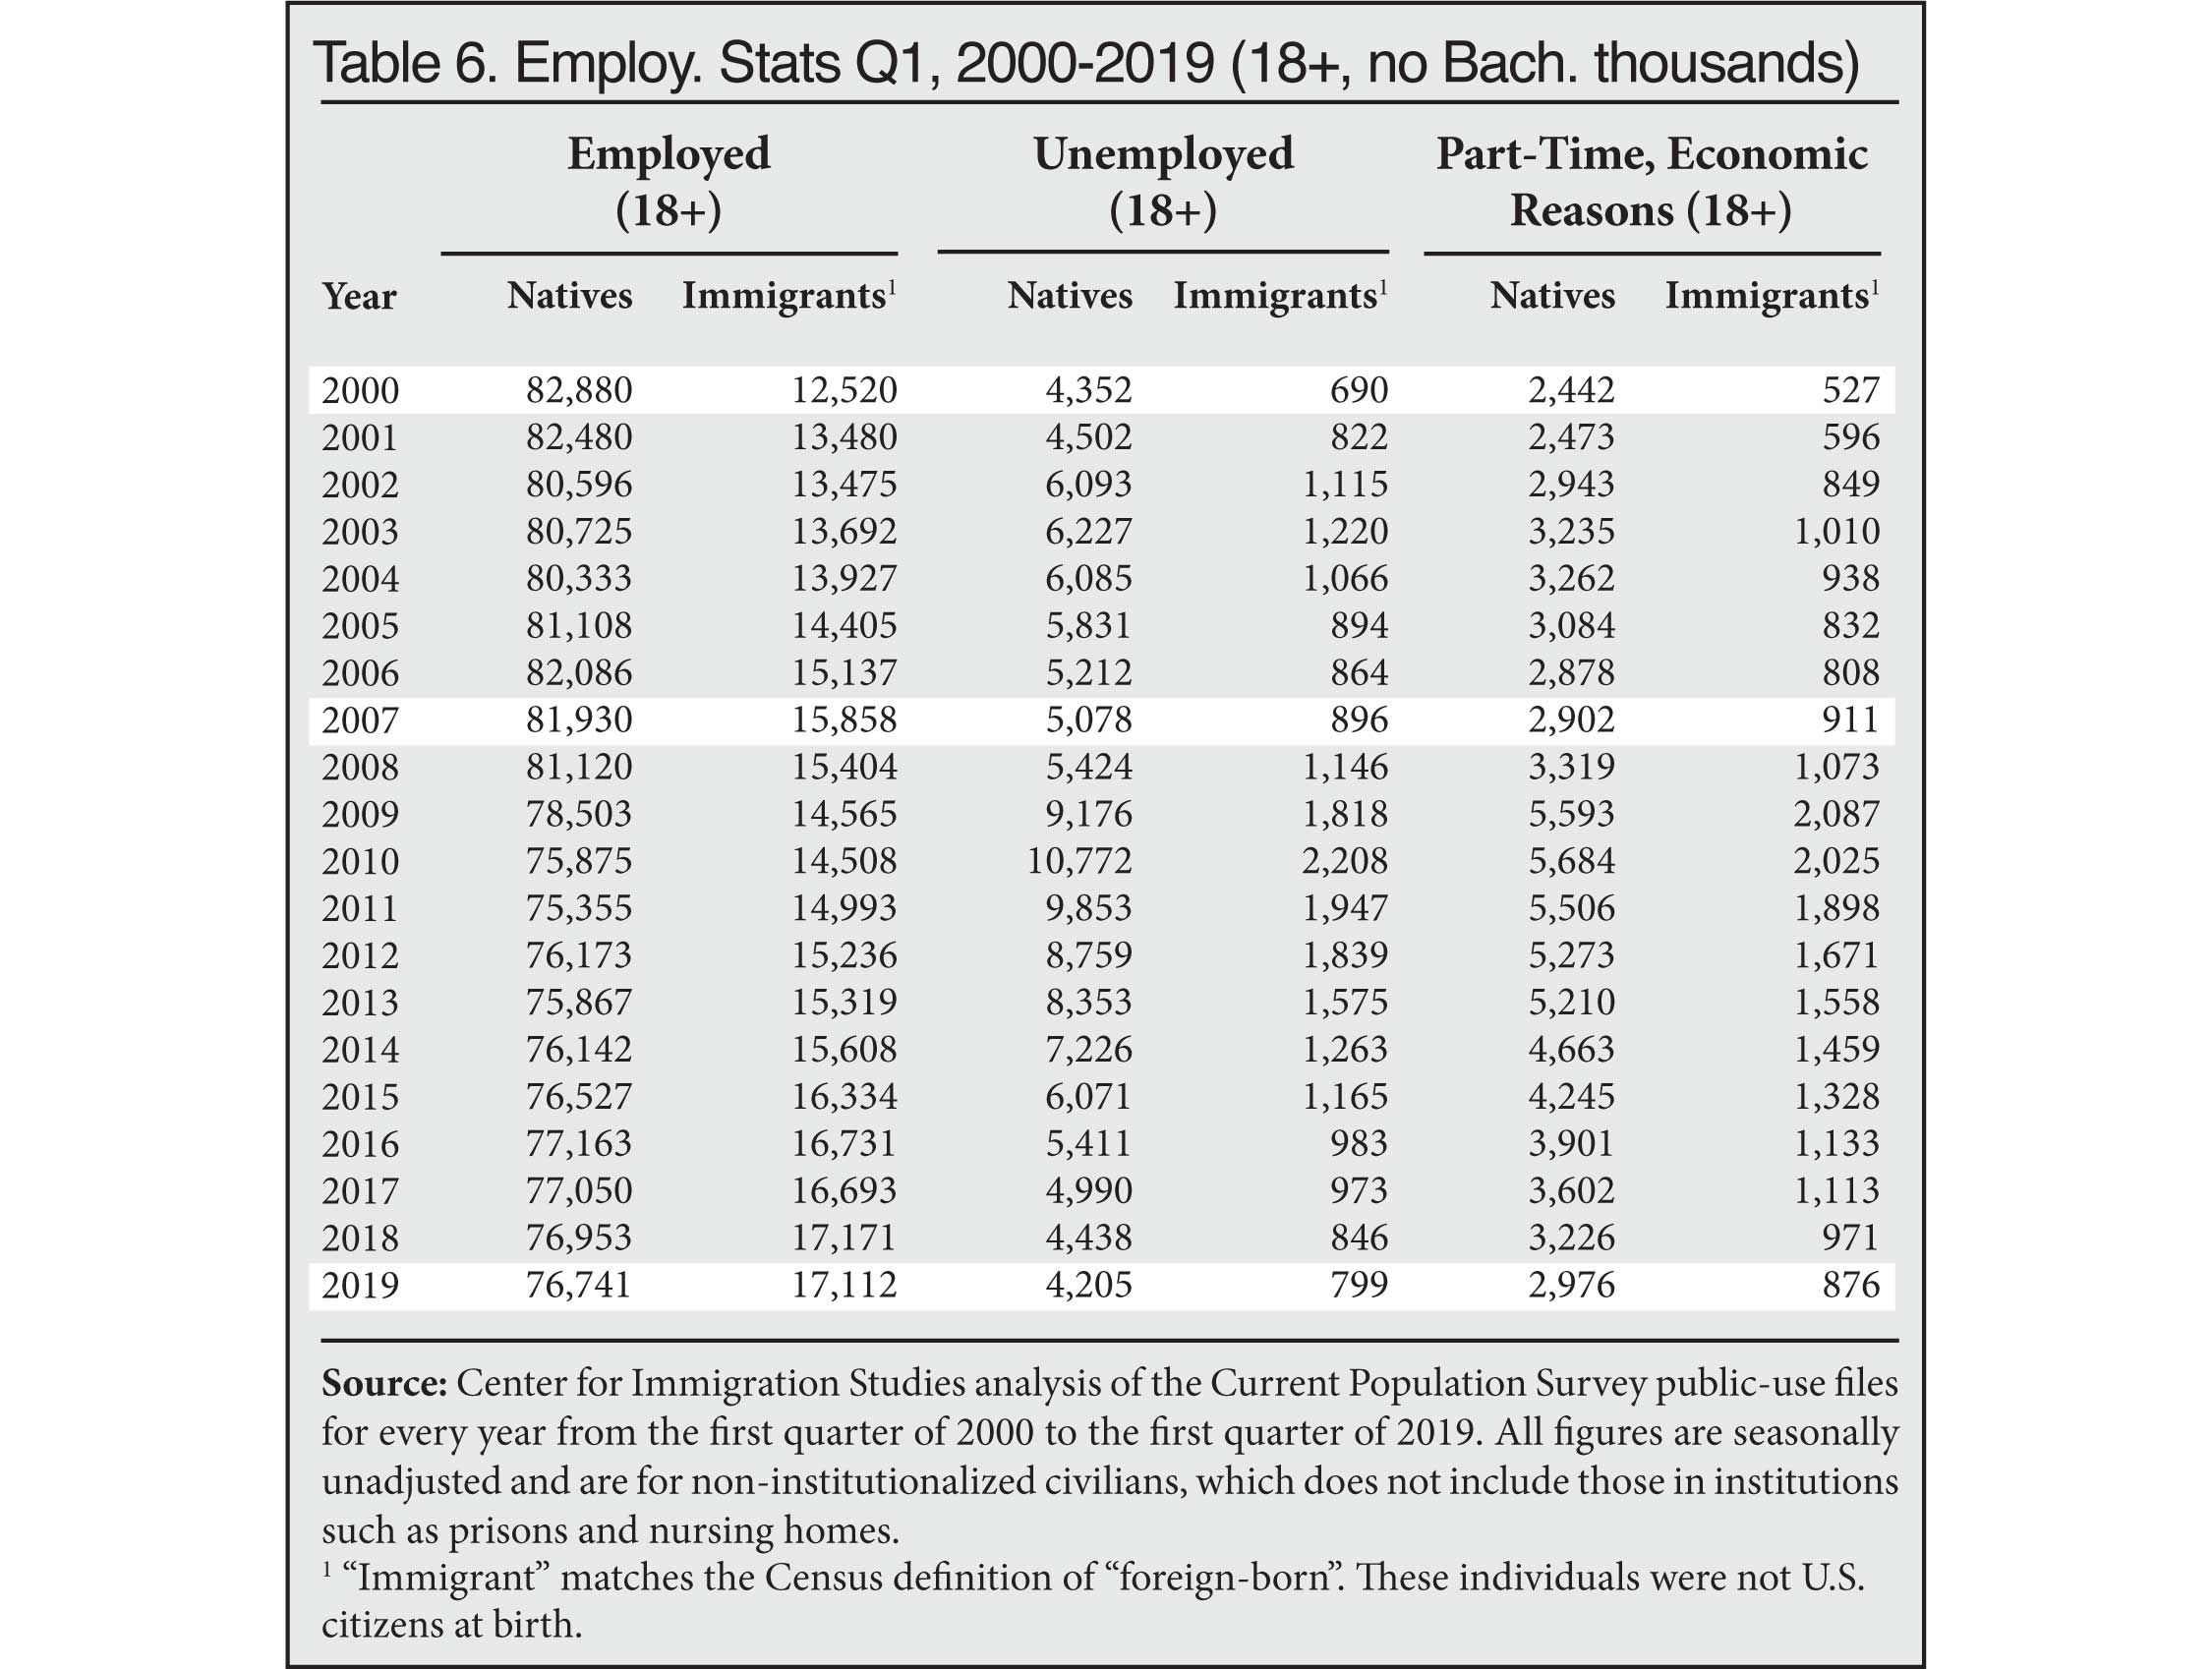 Table: Employment Stats Q1, 2000-2019